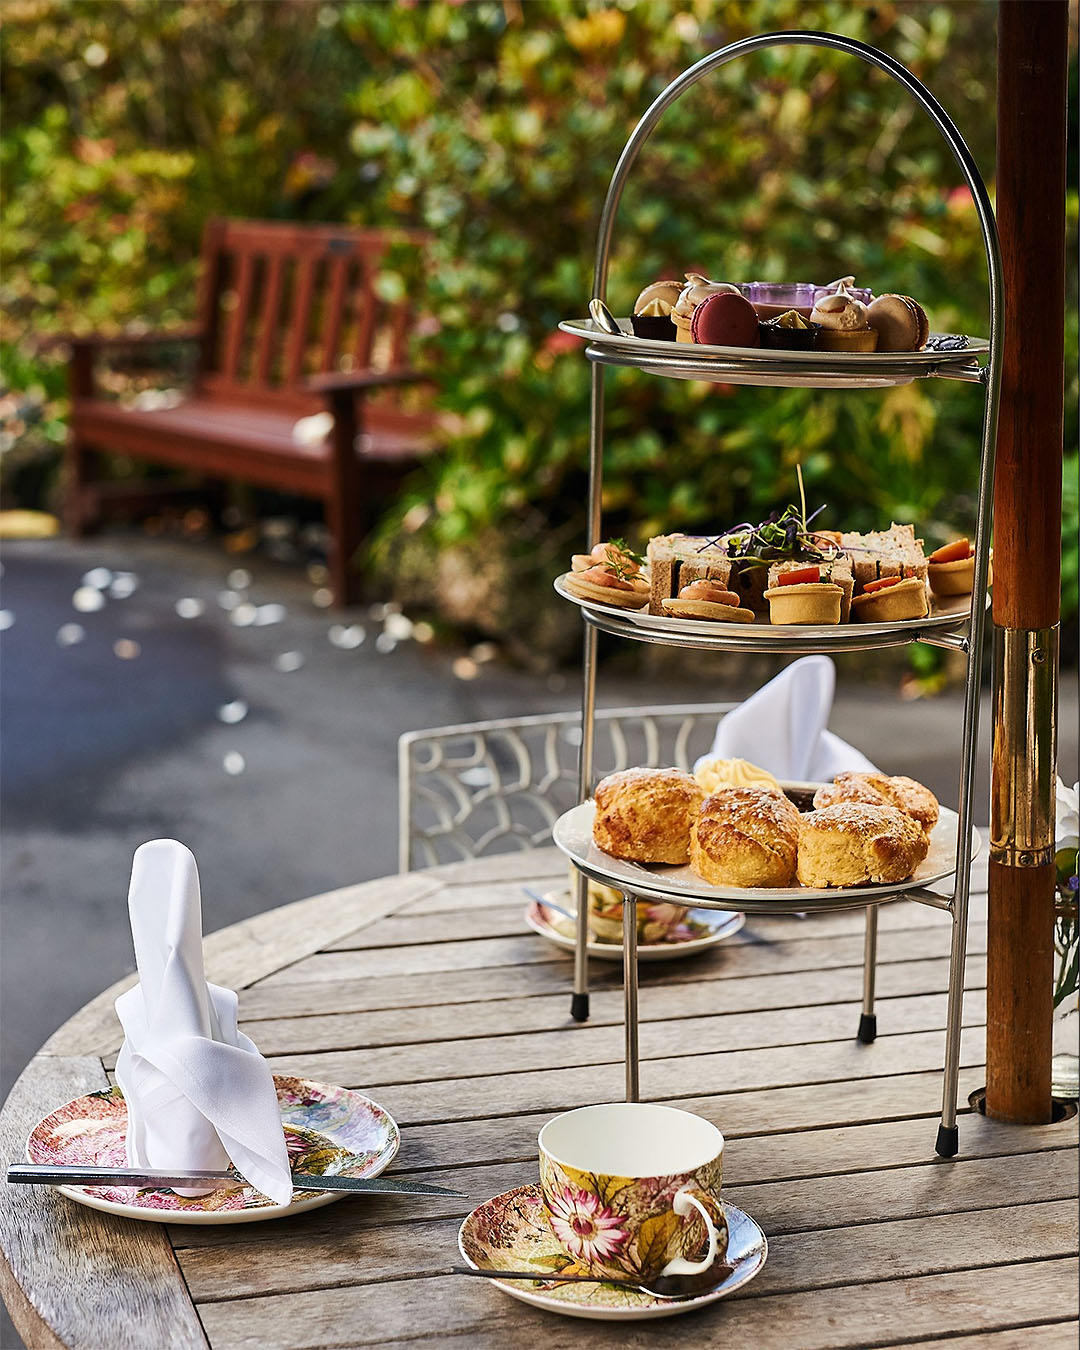 The delightful high tea at Eden Garden is set out in the garden. Definitely one of the best high teas in Auckland.